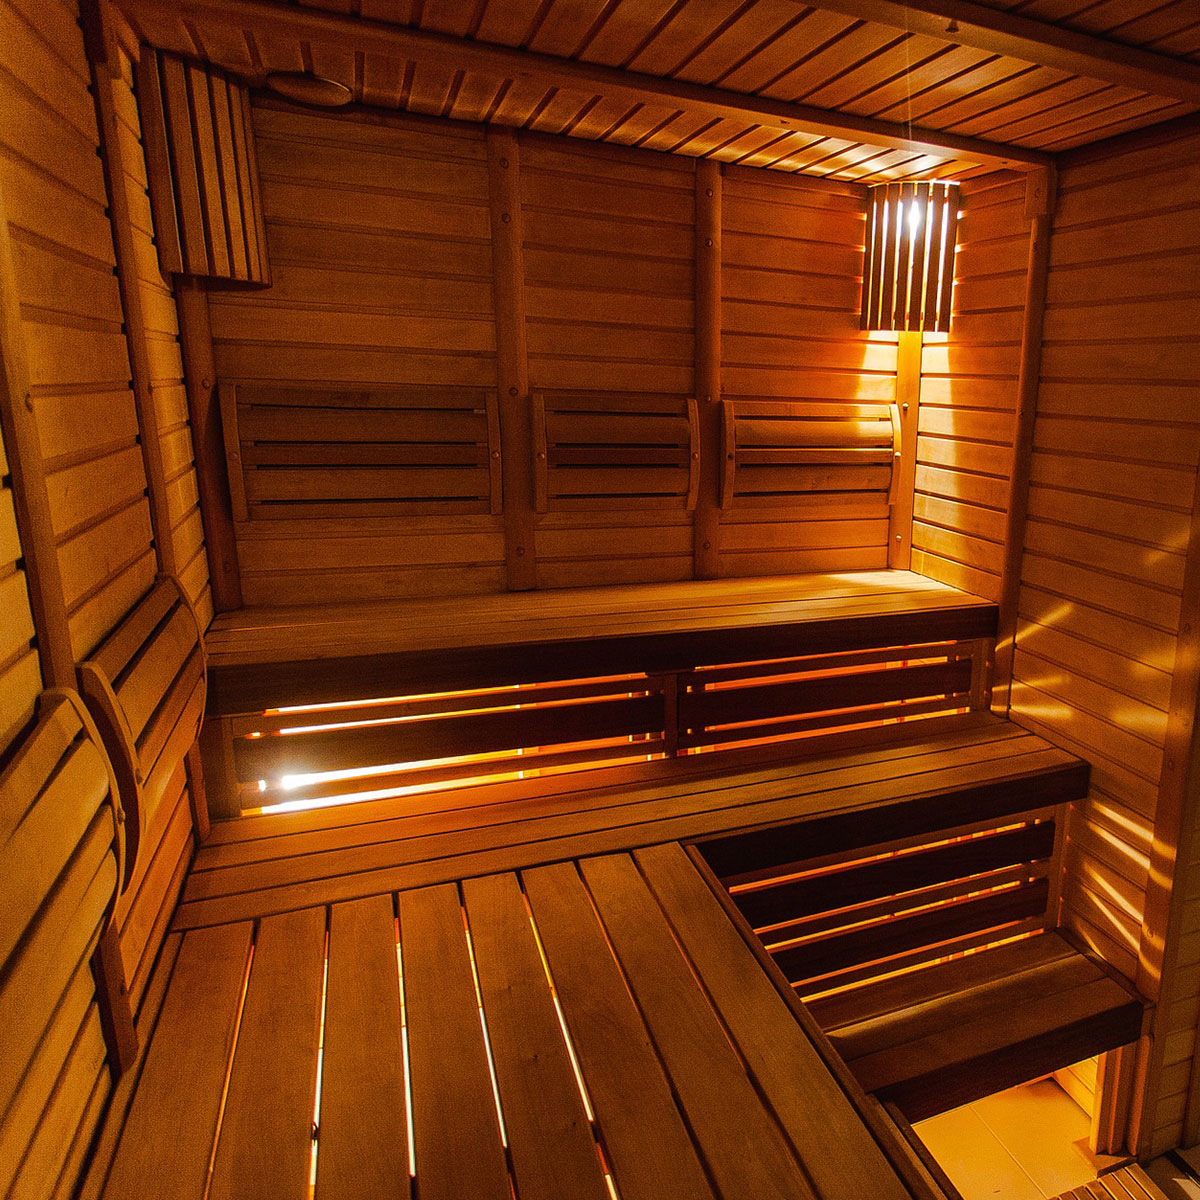 Can You Use Wood in a Sauna – The Risks and Benefits